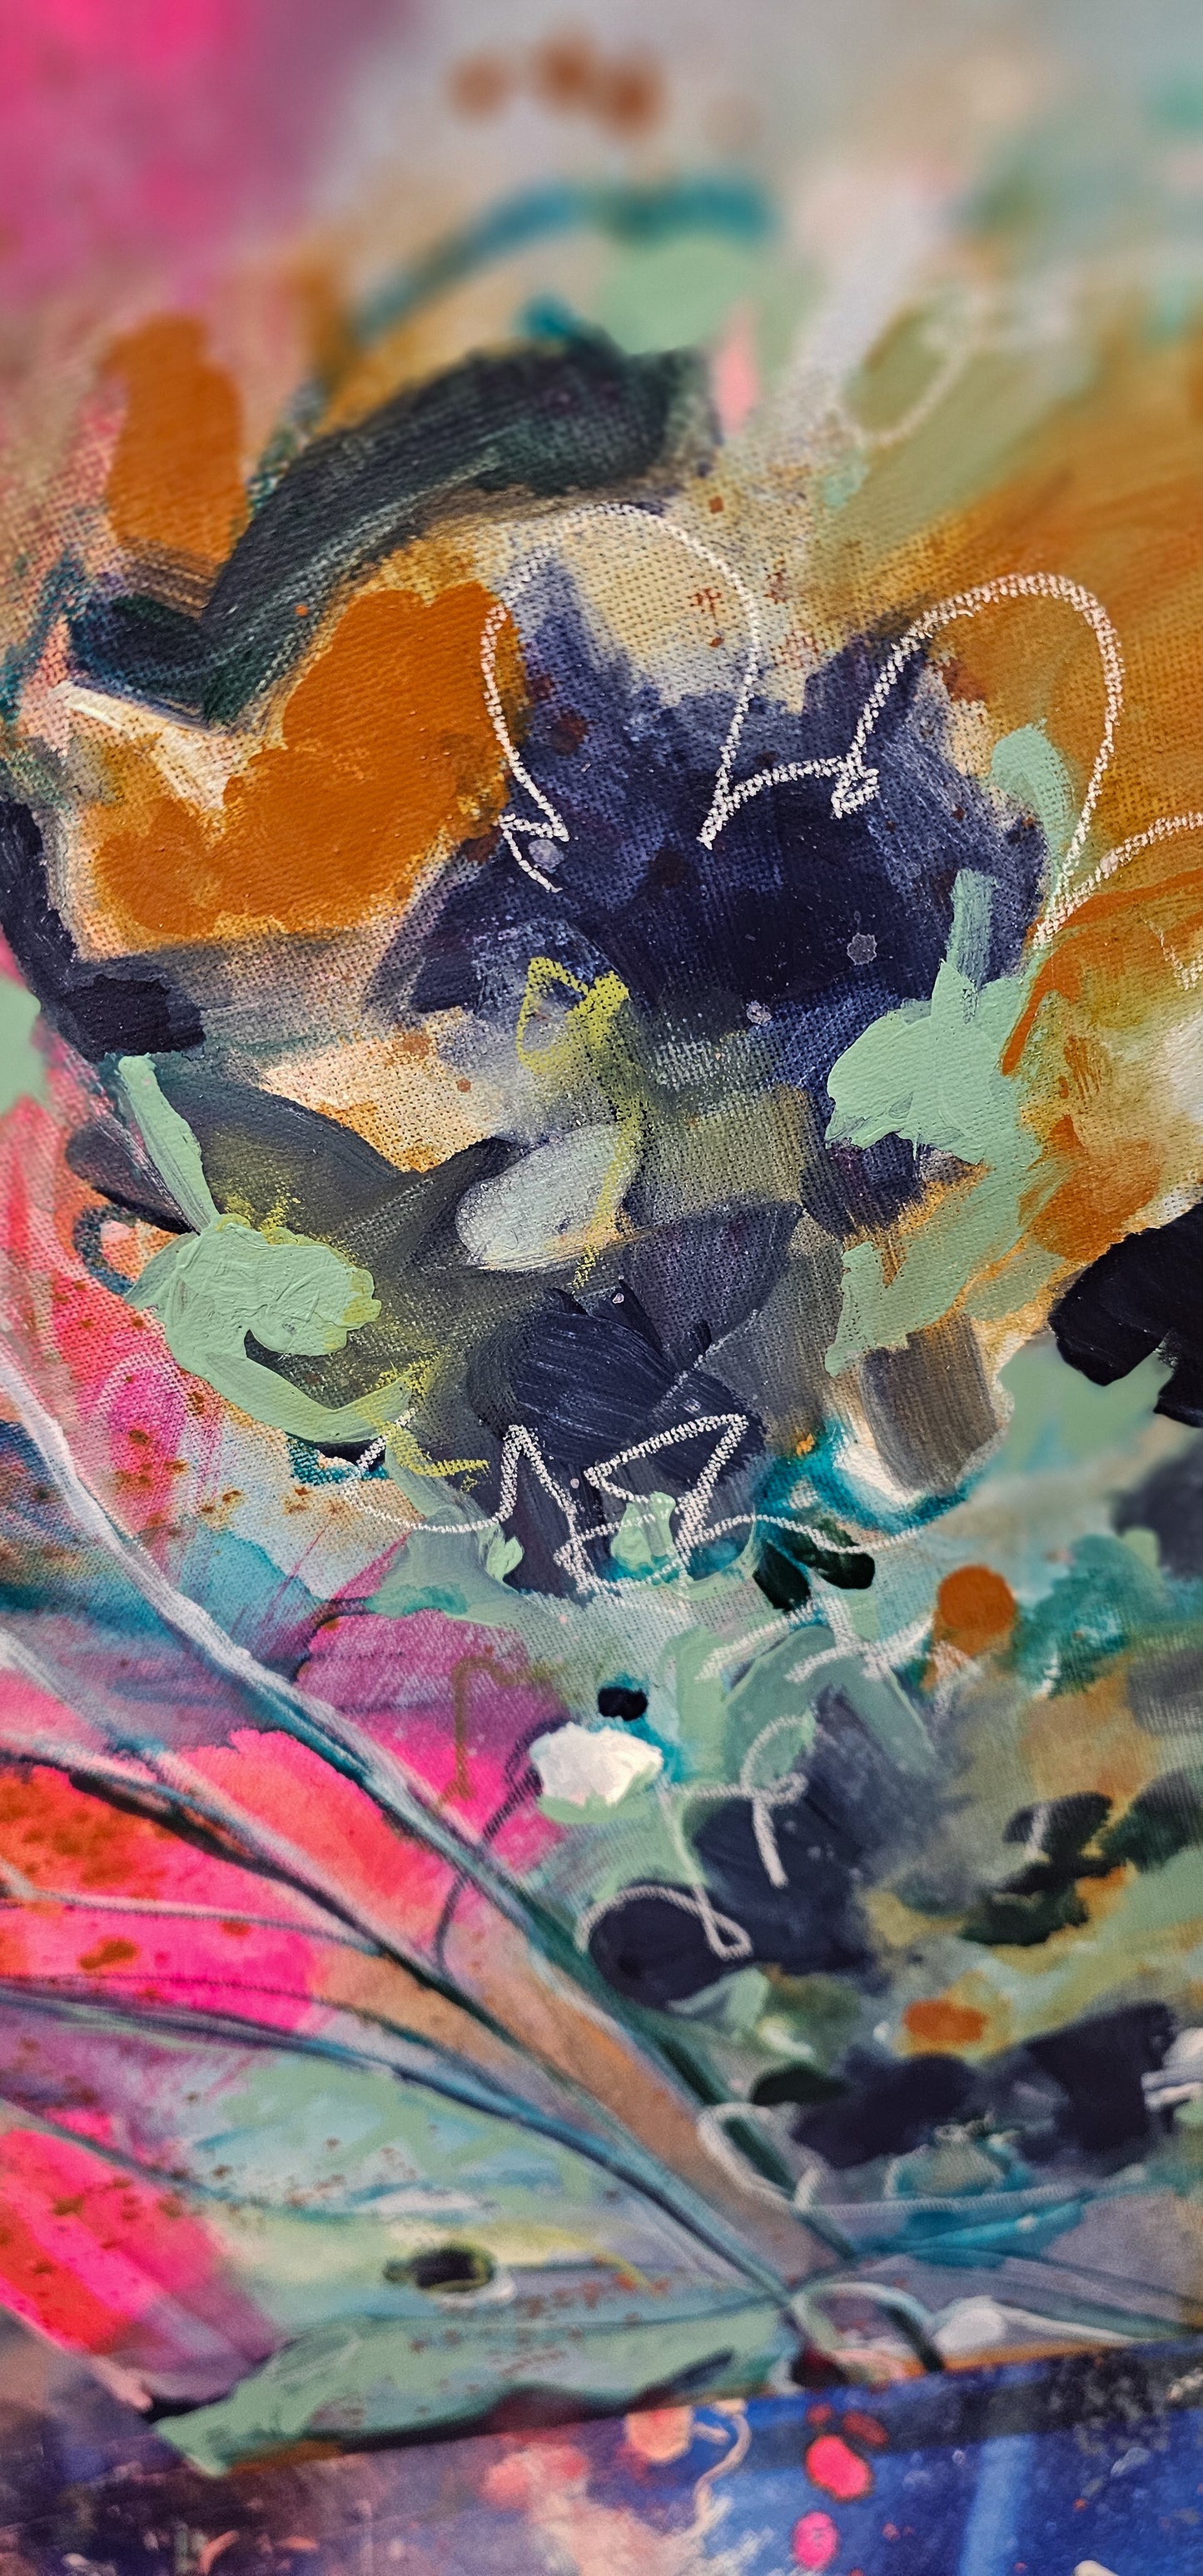 'Irene' Abstract Floral Painting